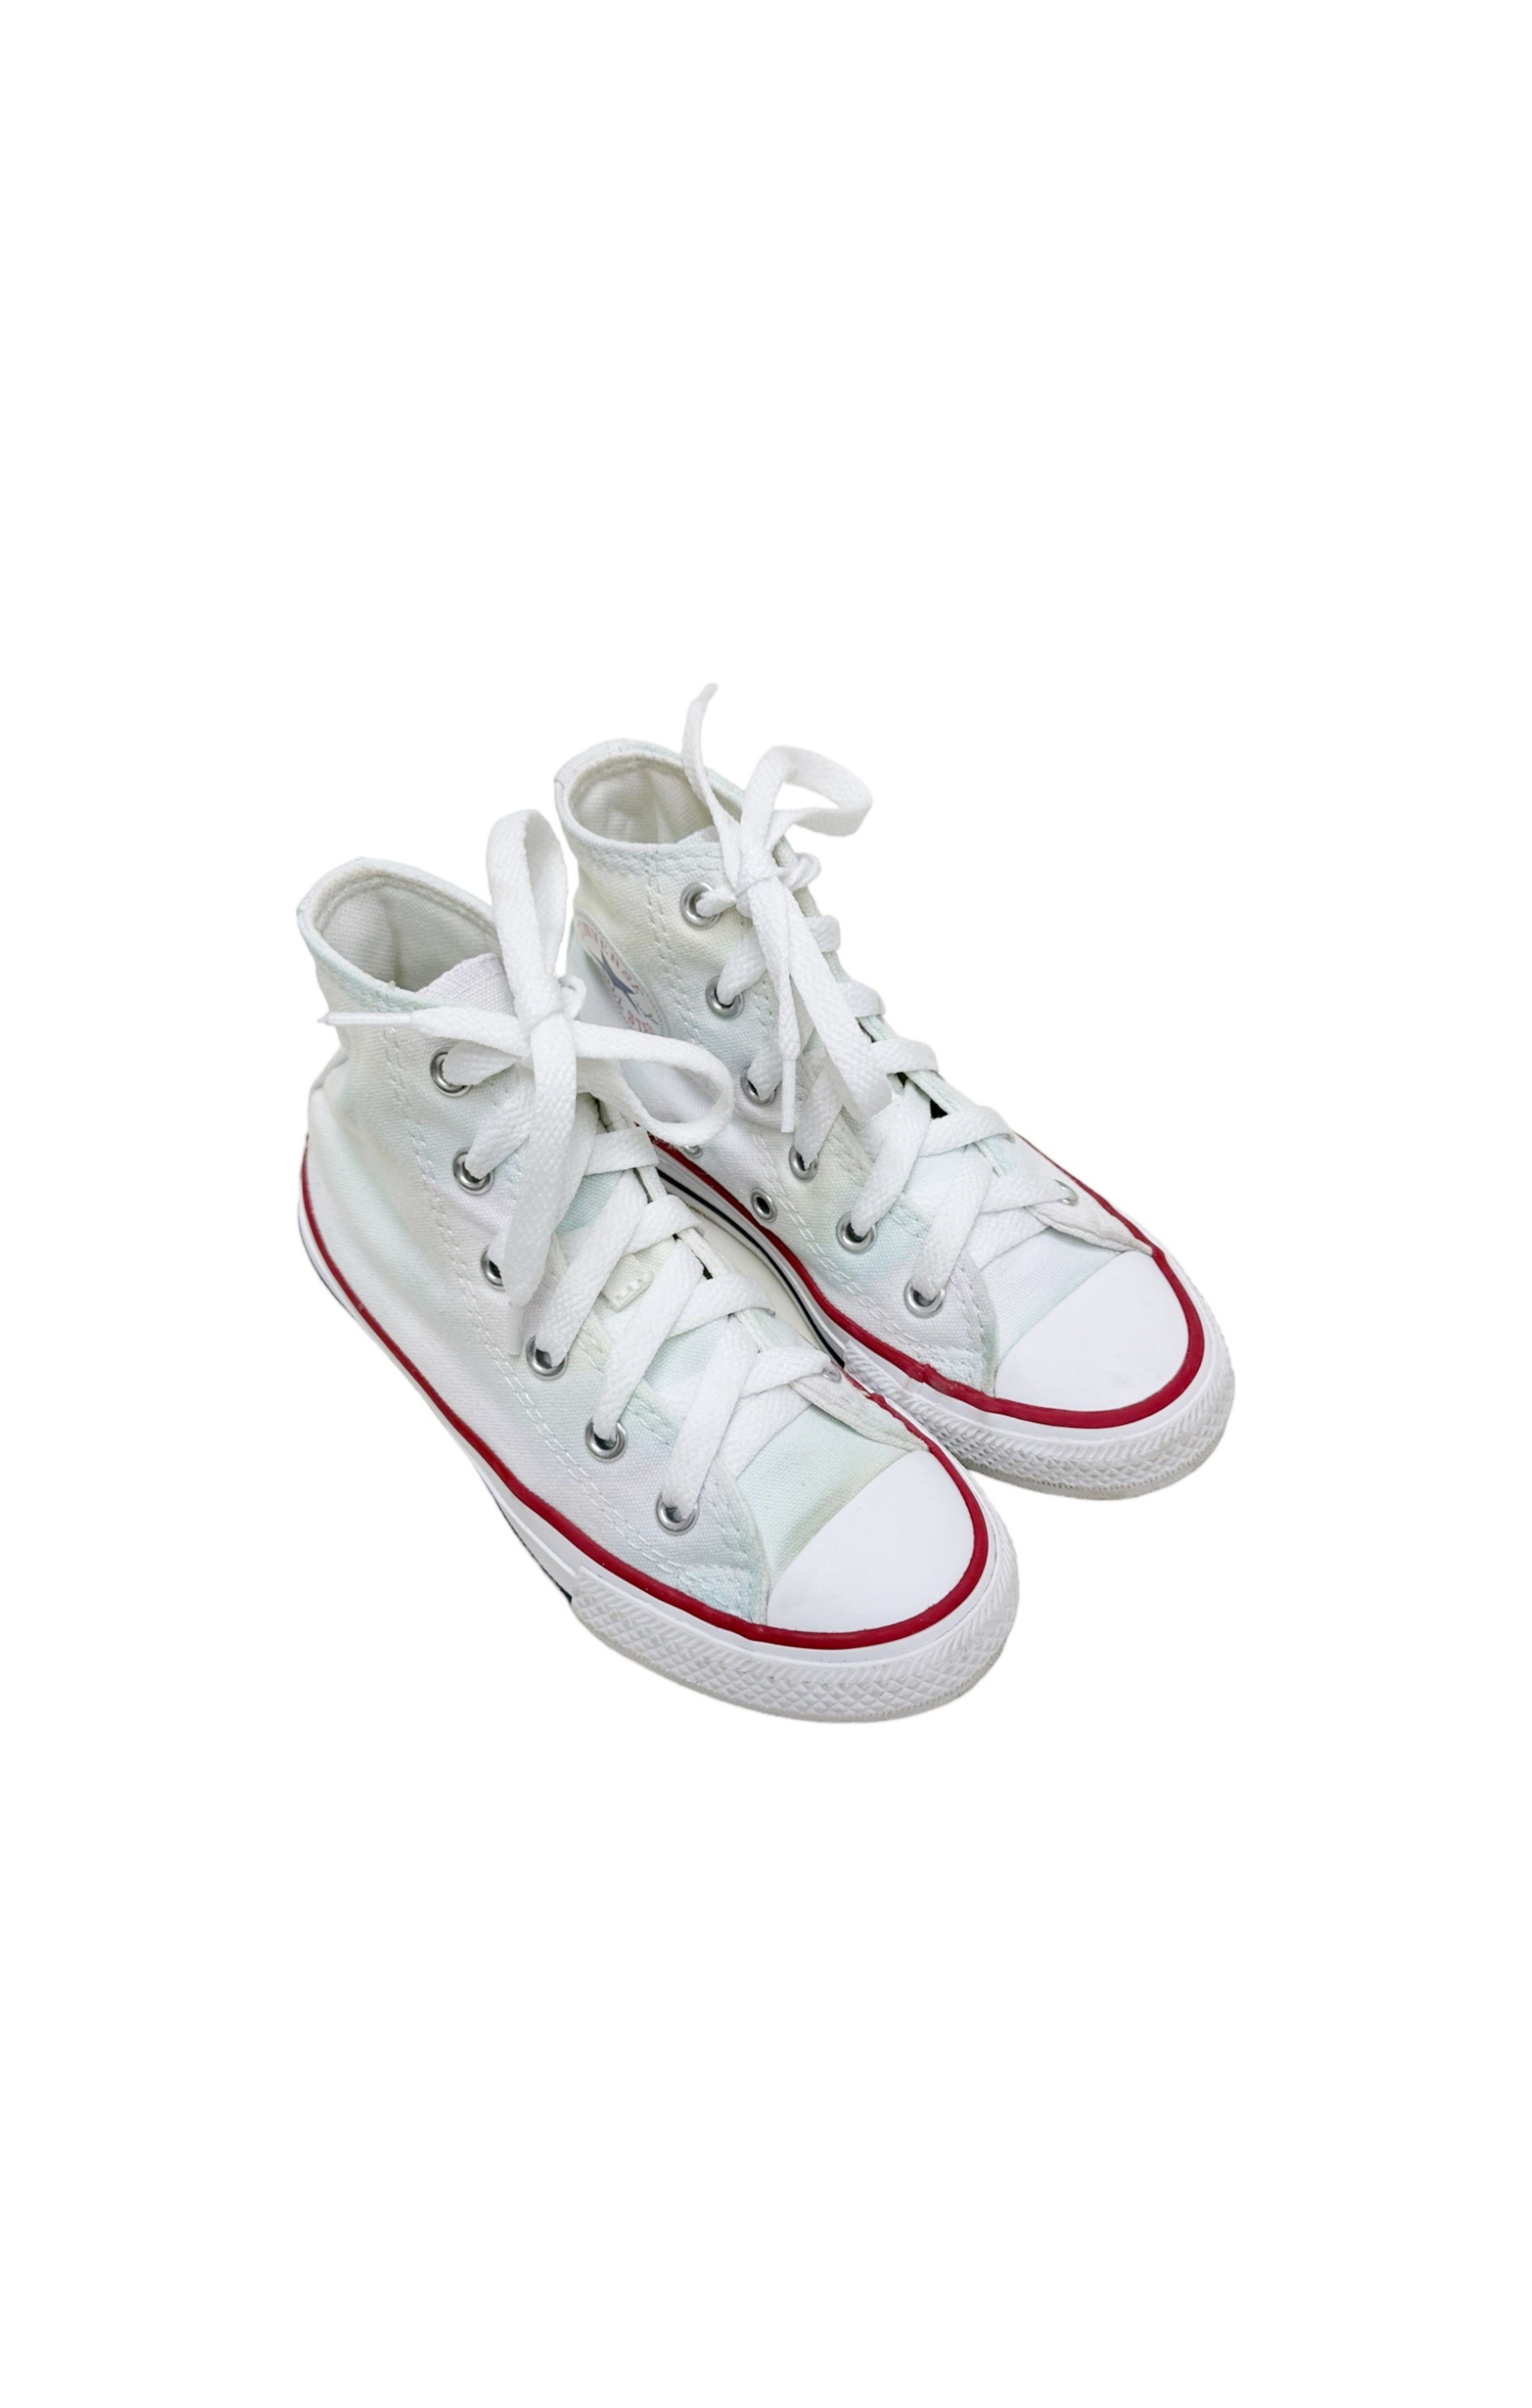 CONVERSE Sneakers Size: Toddler US 11.5